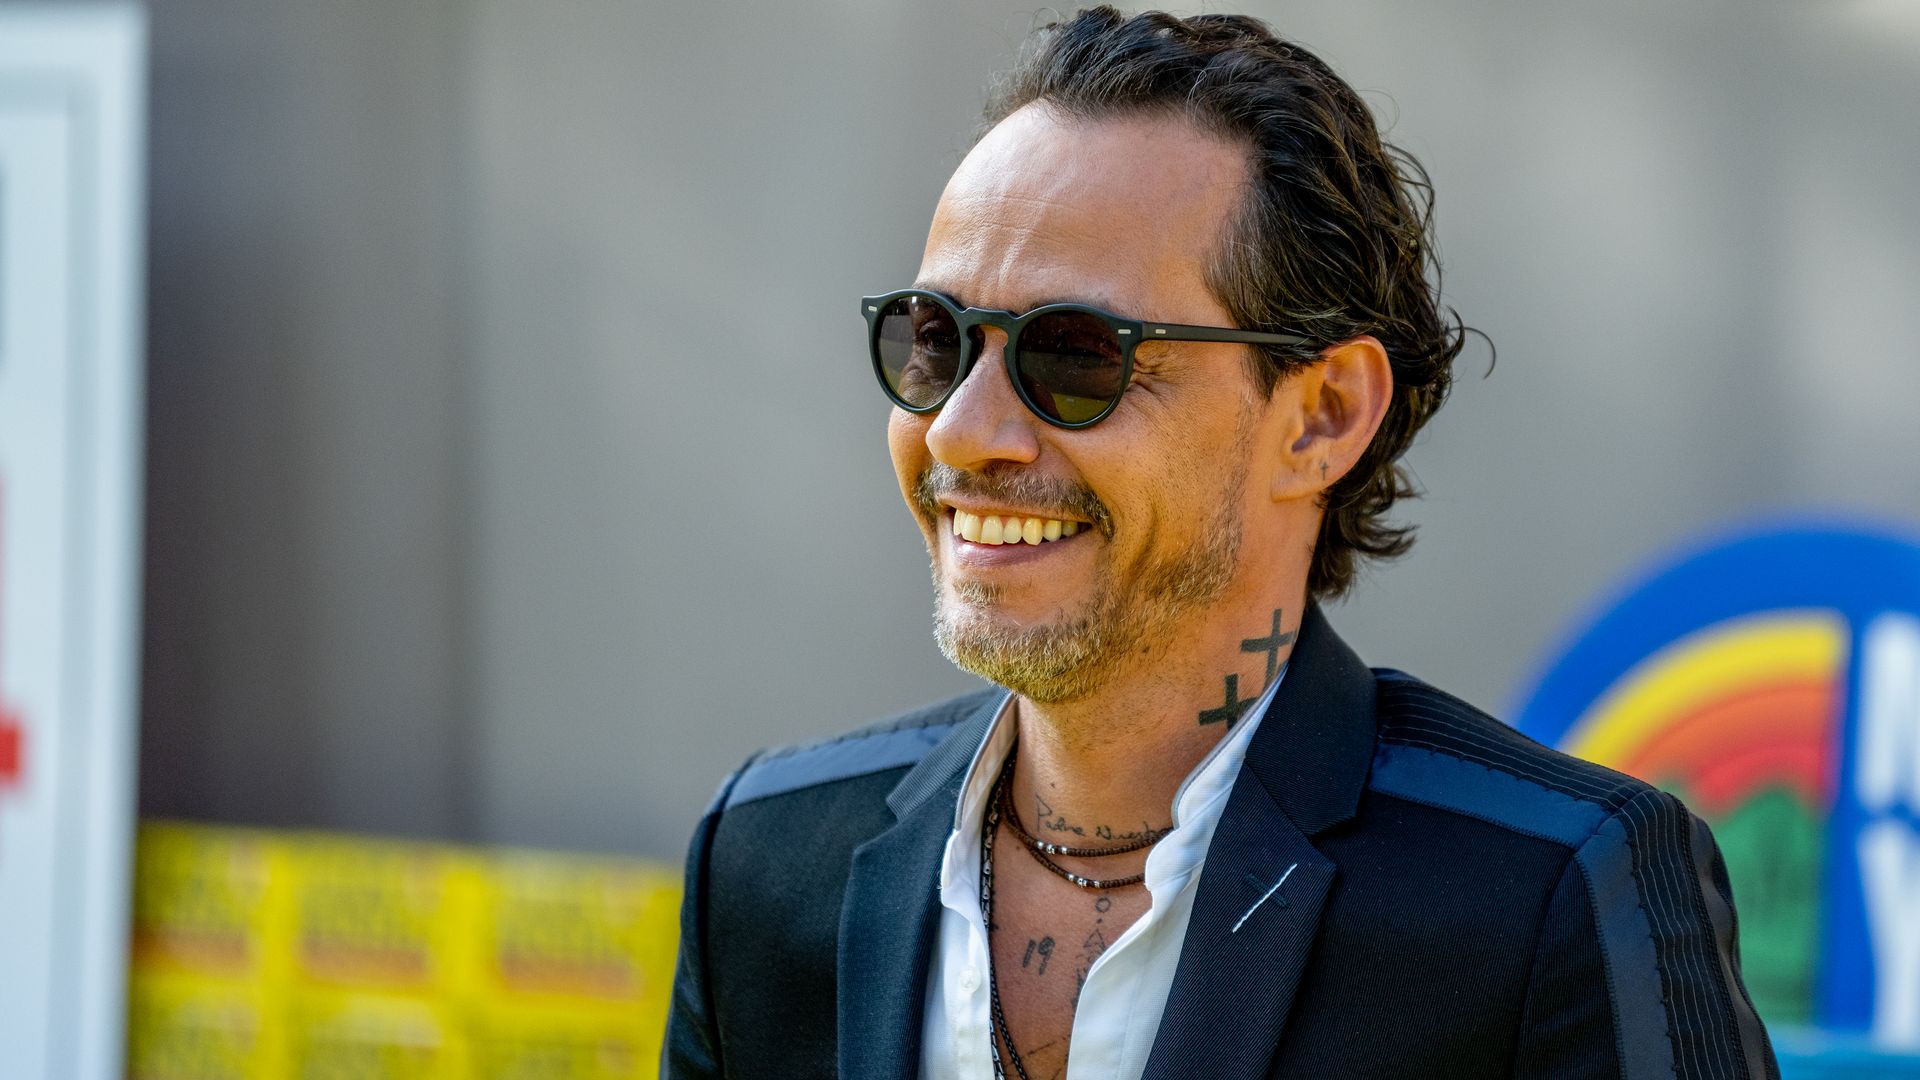 Marc Anthony smiling in glasses and a suit